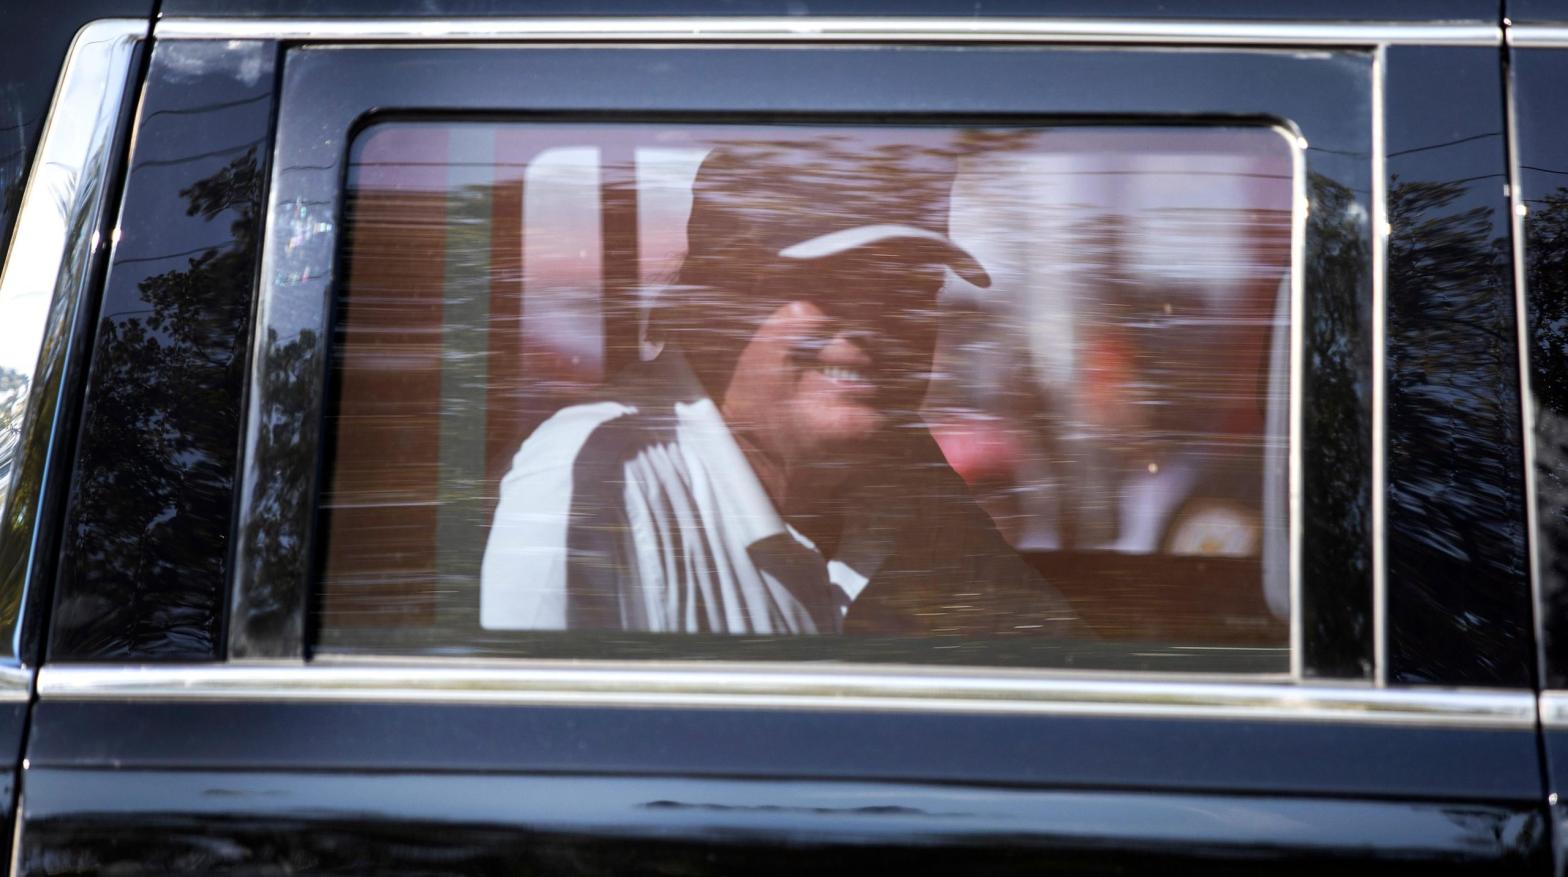 Trump grinning as he drives past supporters in West Palm Beach, Florida, on Feb. 15, 2021. (Photo: Joe Raedle, Getty Images)